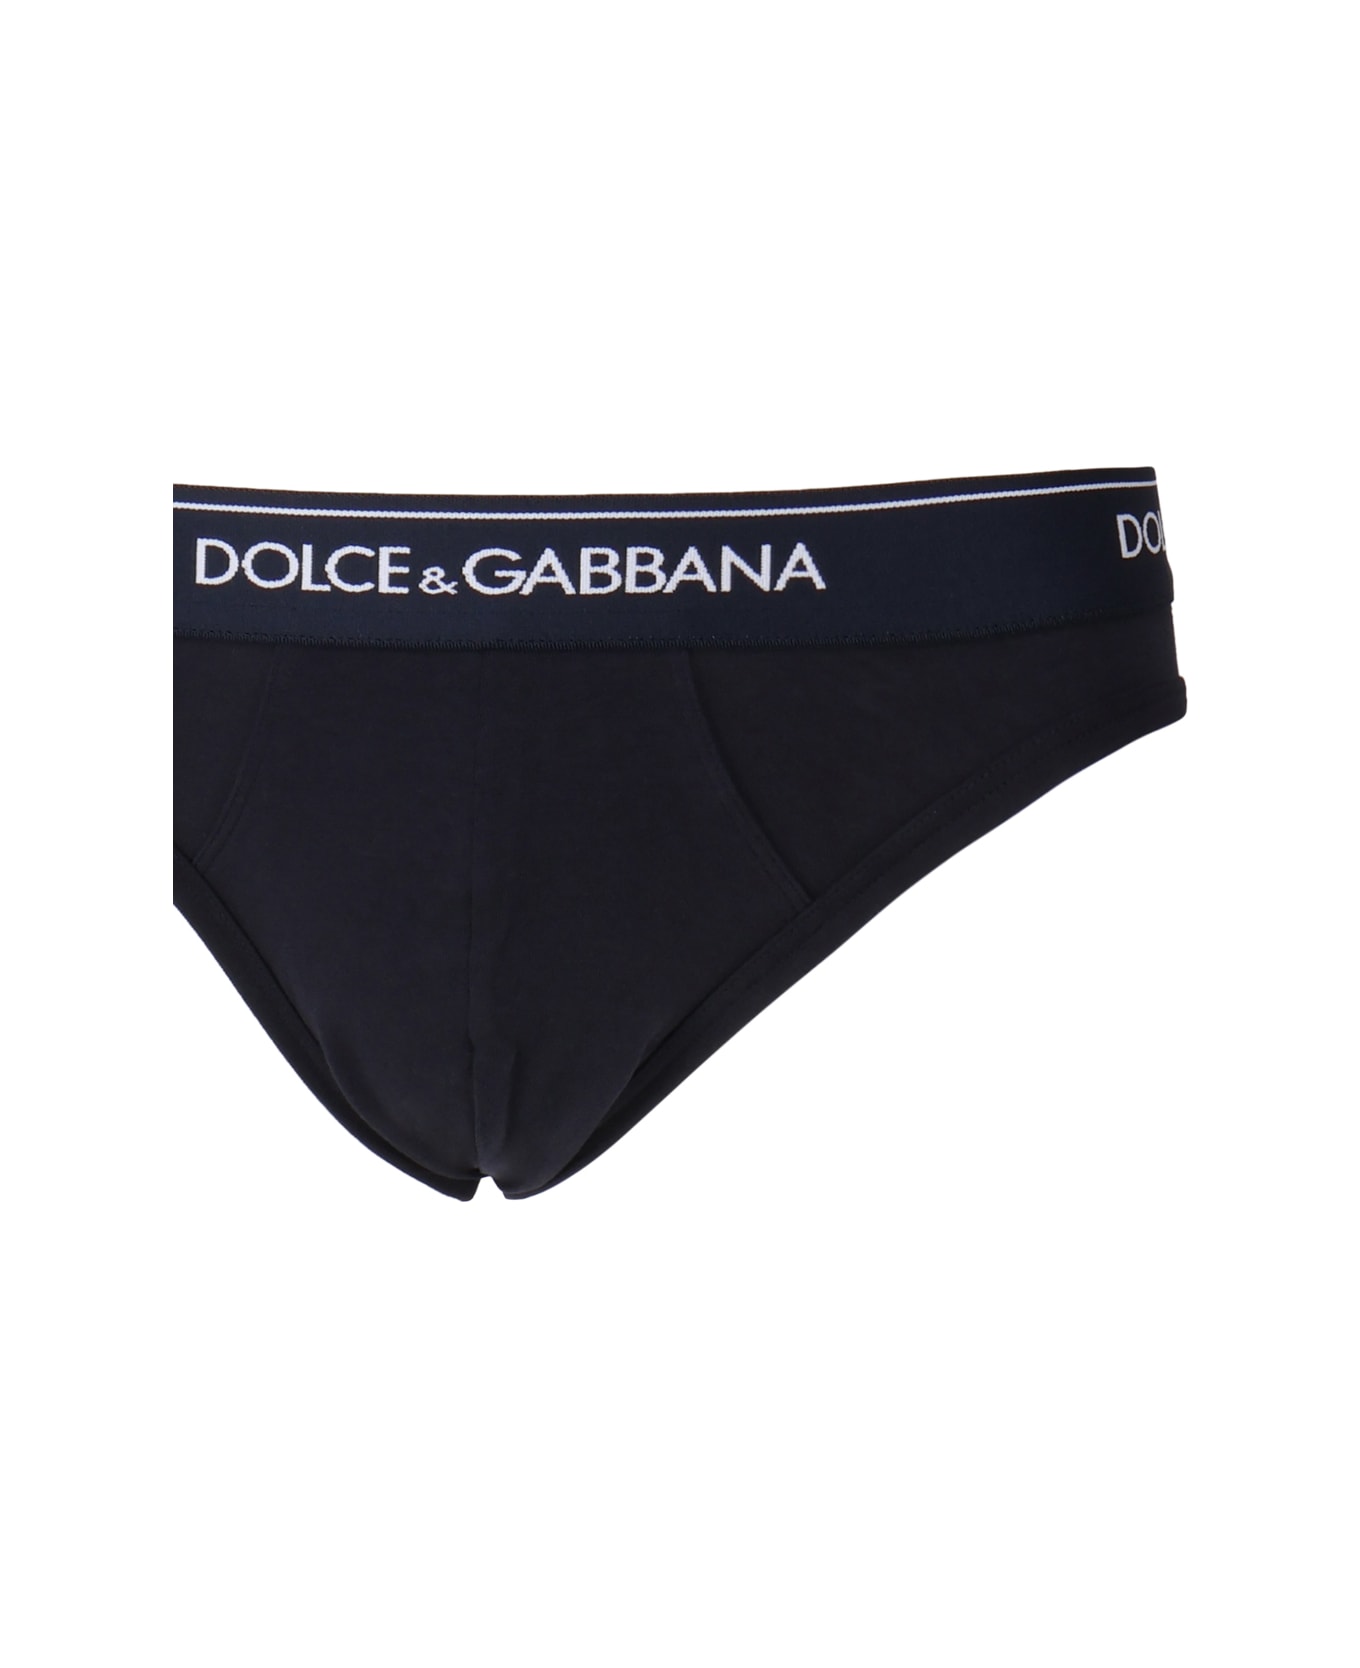 Dolce & Gabbana Briefs With Logoed Elastic - Blue navy ショーツ